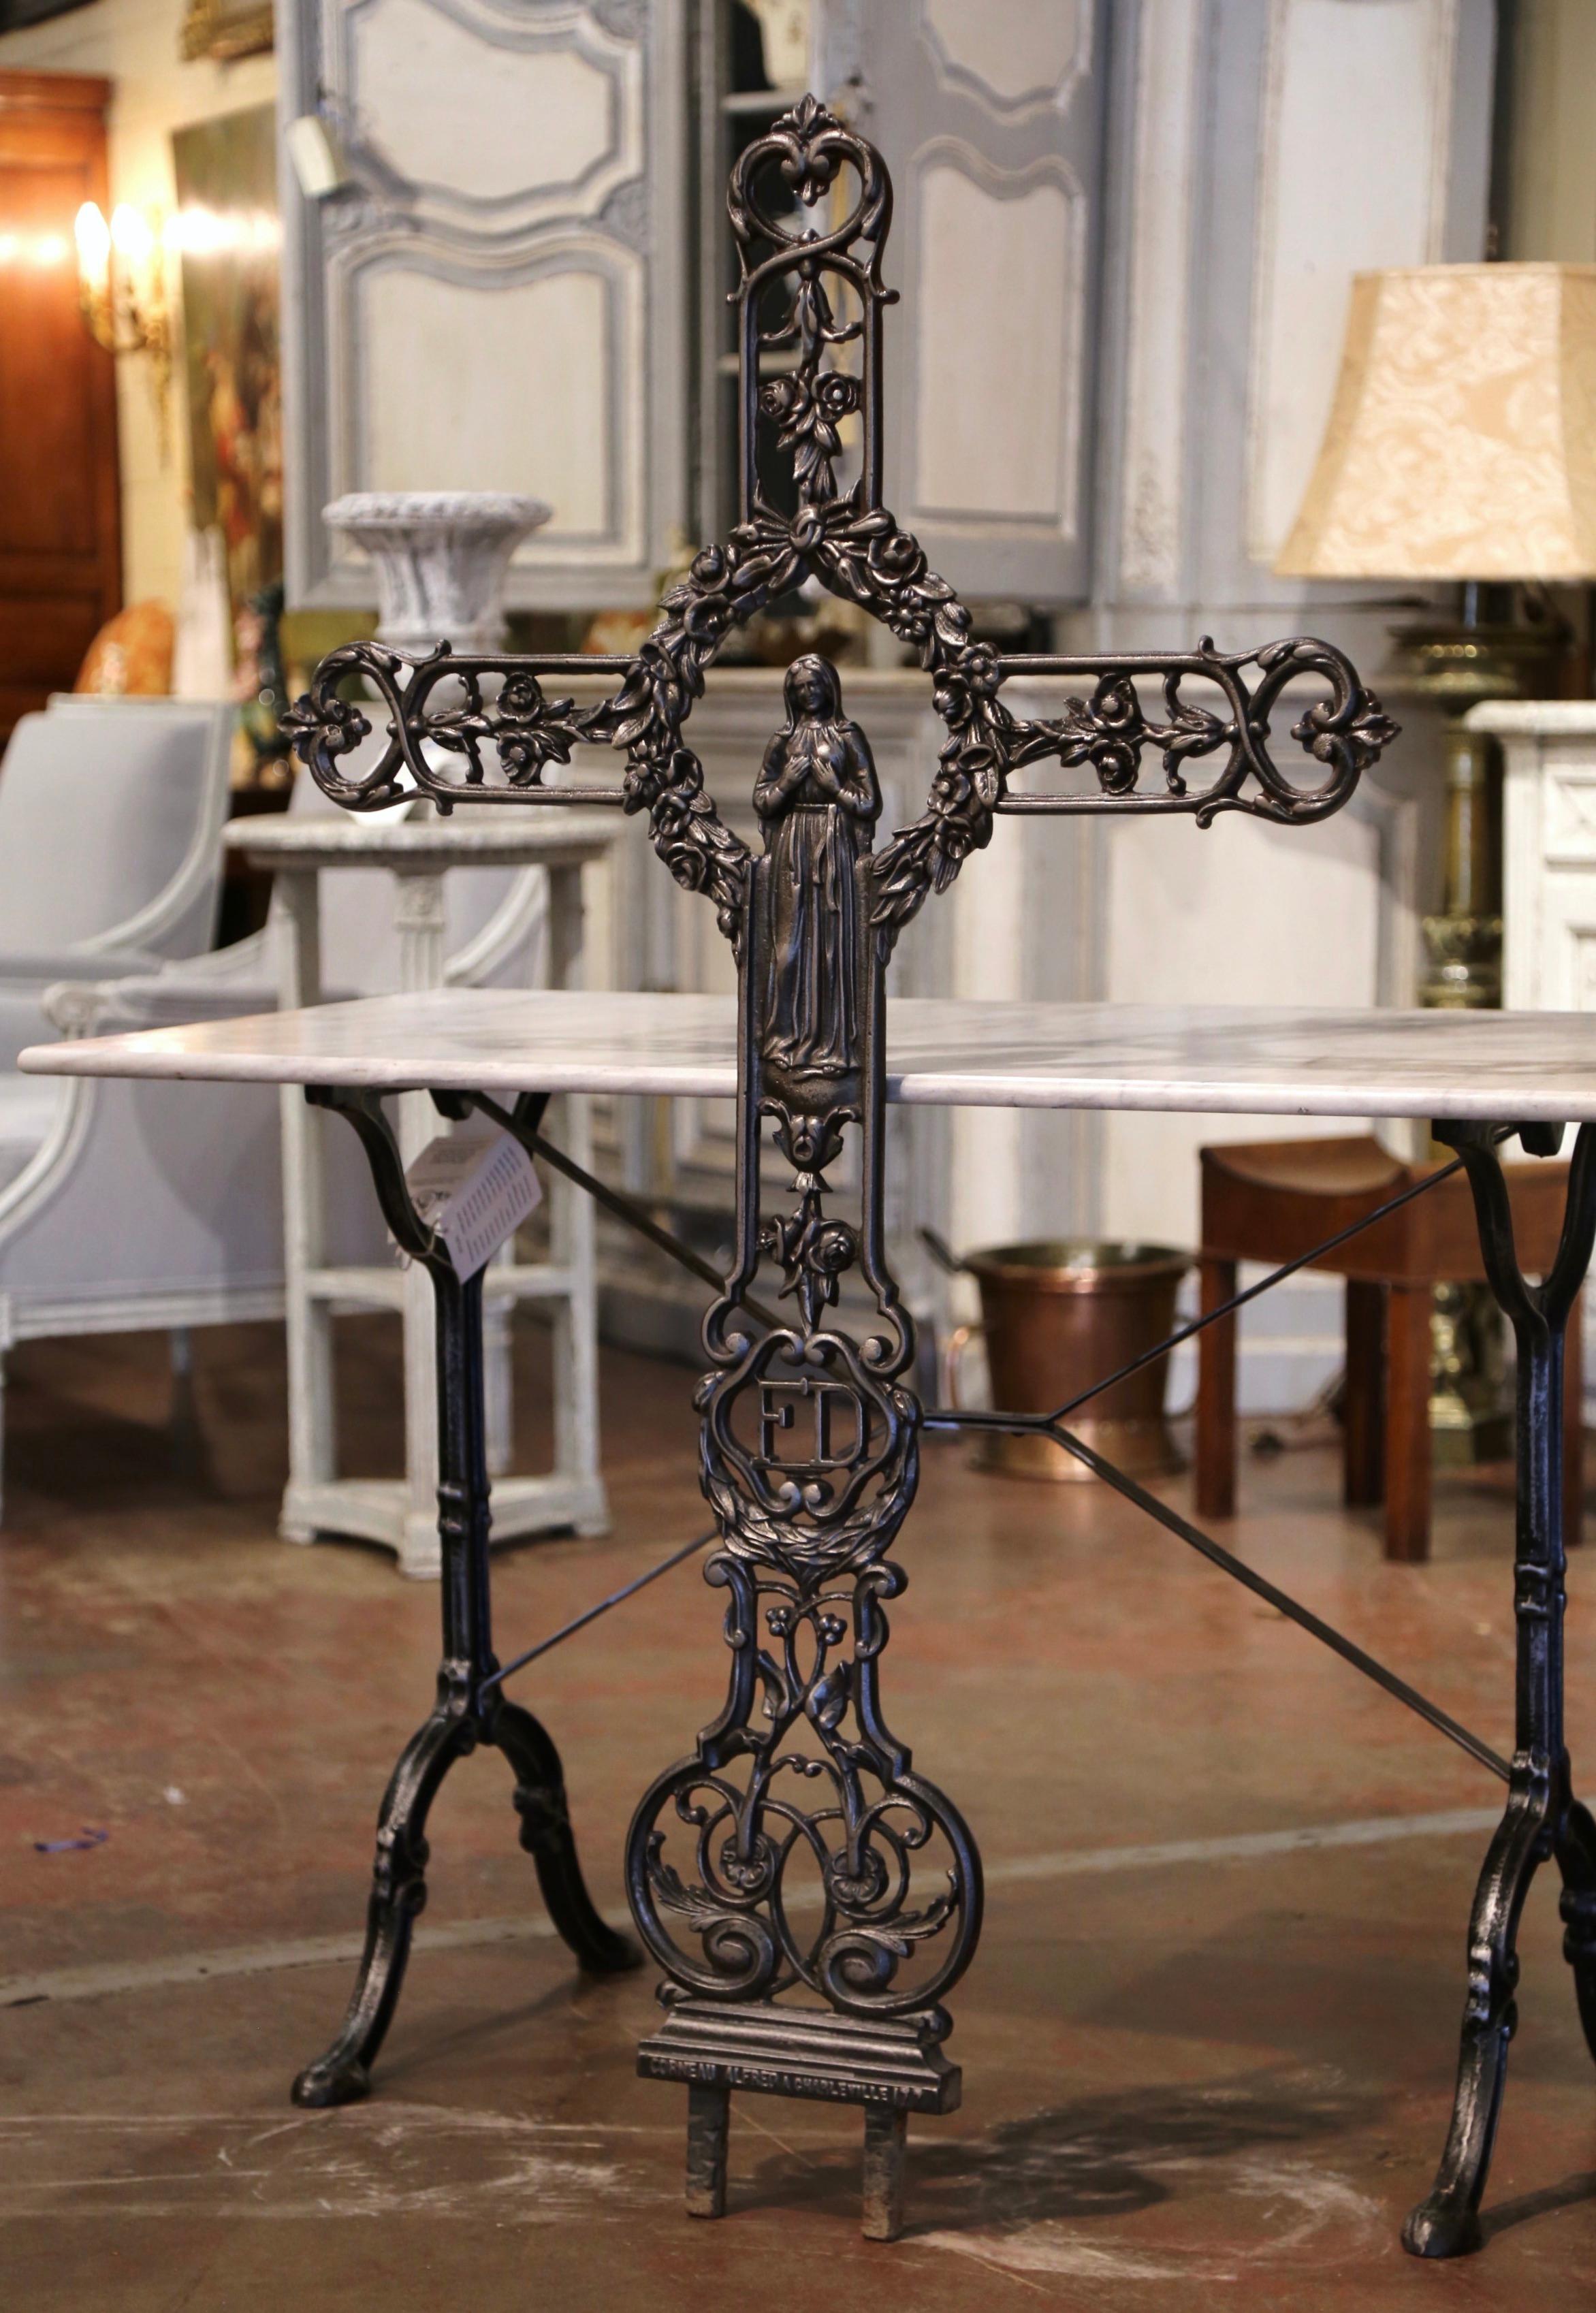 This beautiful antique cross was crafted in France, circa 1870. The large iron religious item decorated with scroll and floral motifs is embellished with the Virgin Mary in prayers at the center, surrounded by a beautifully crafted wreath. The tall